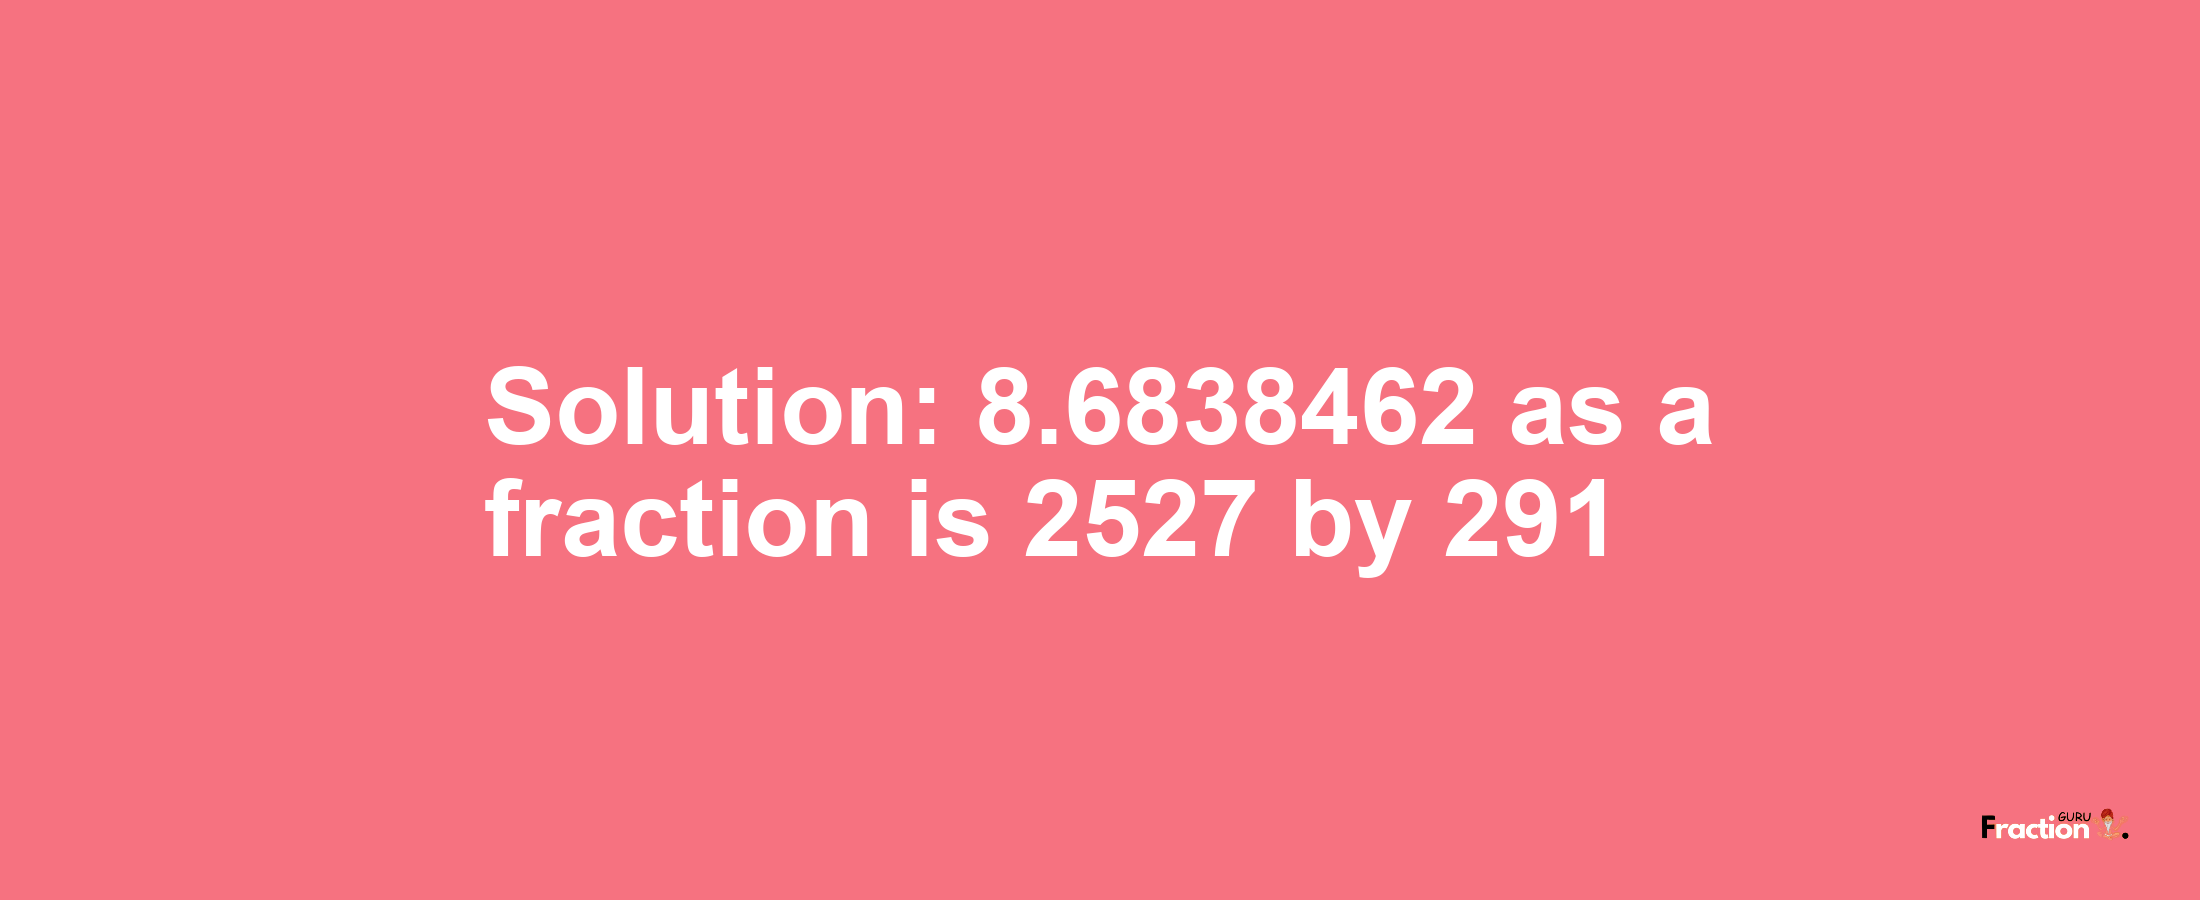 Solution:8.6838462 as a fraction is 2527/291